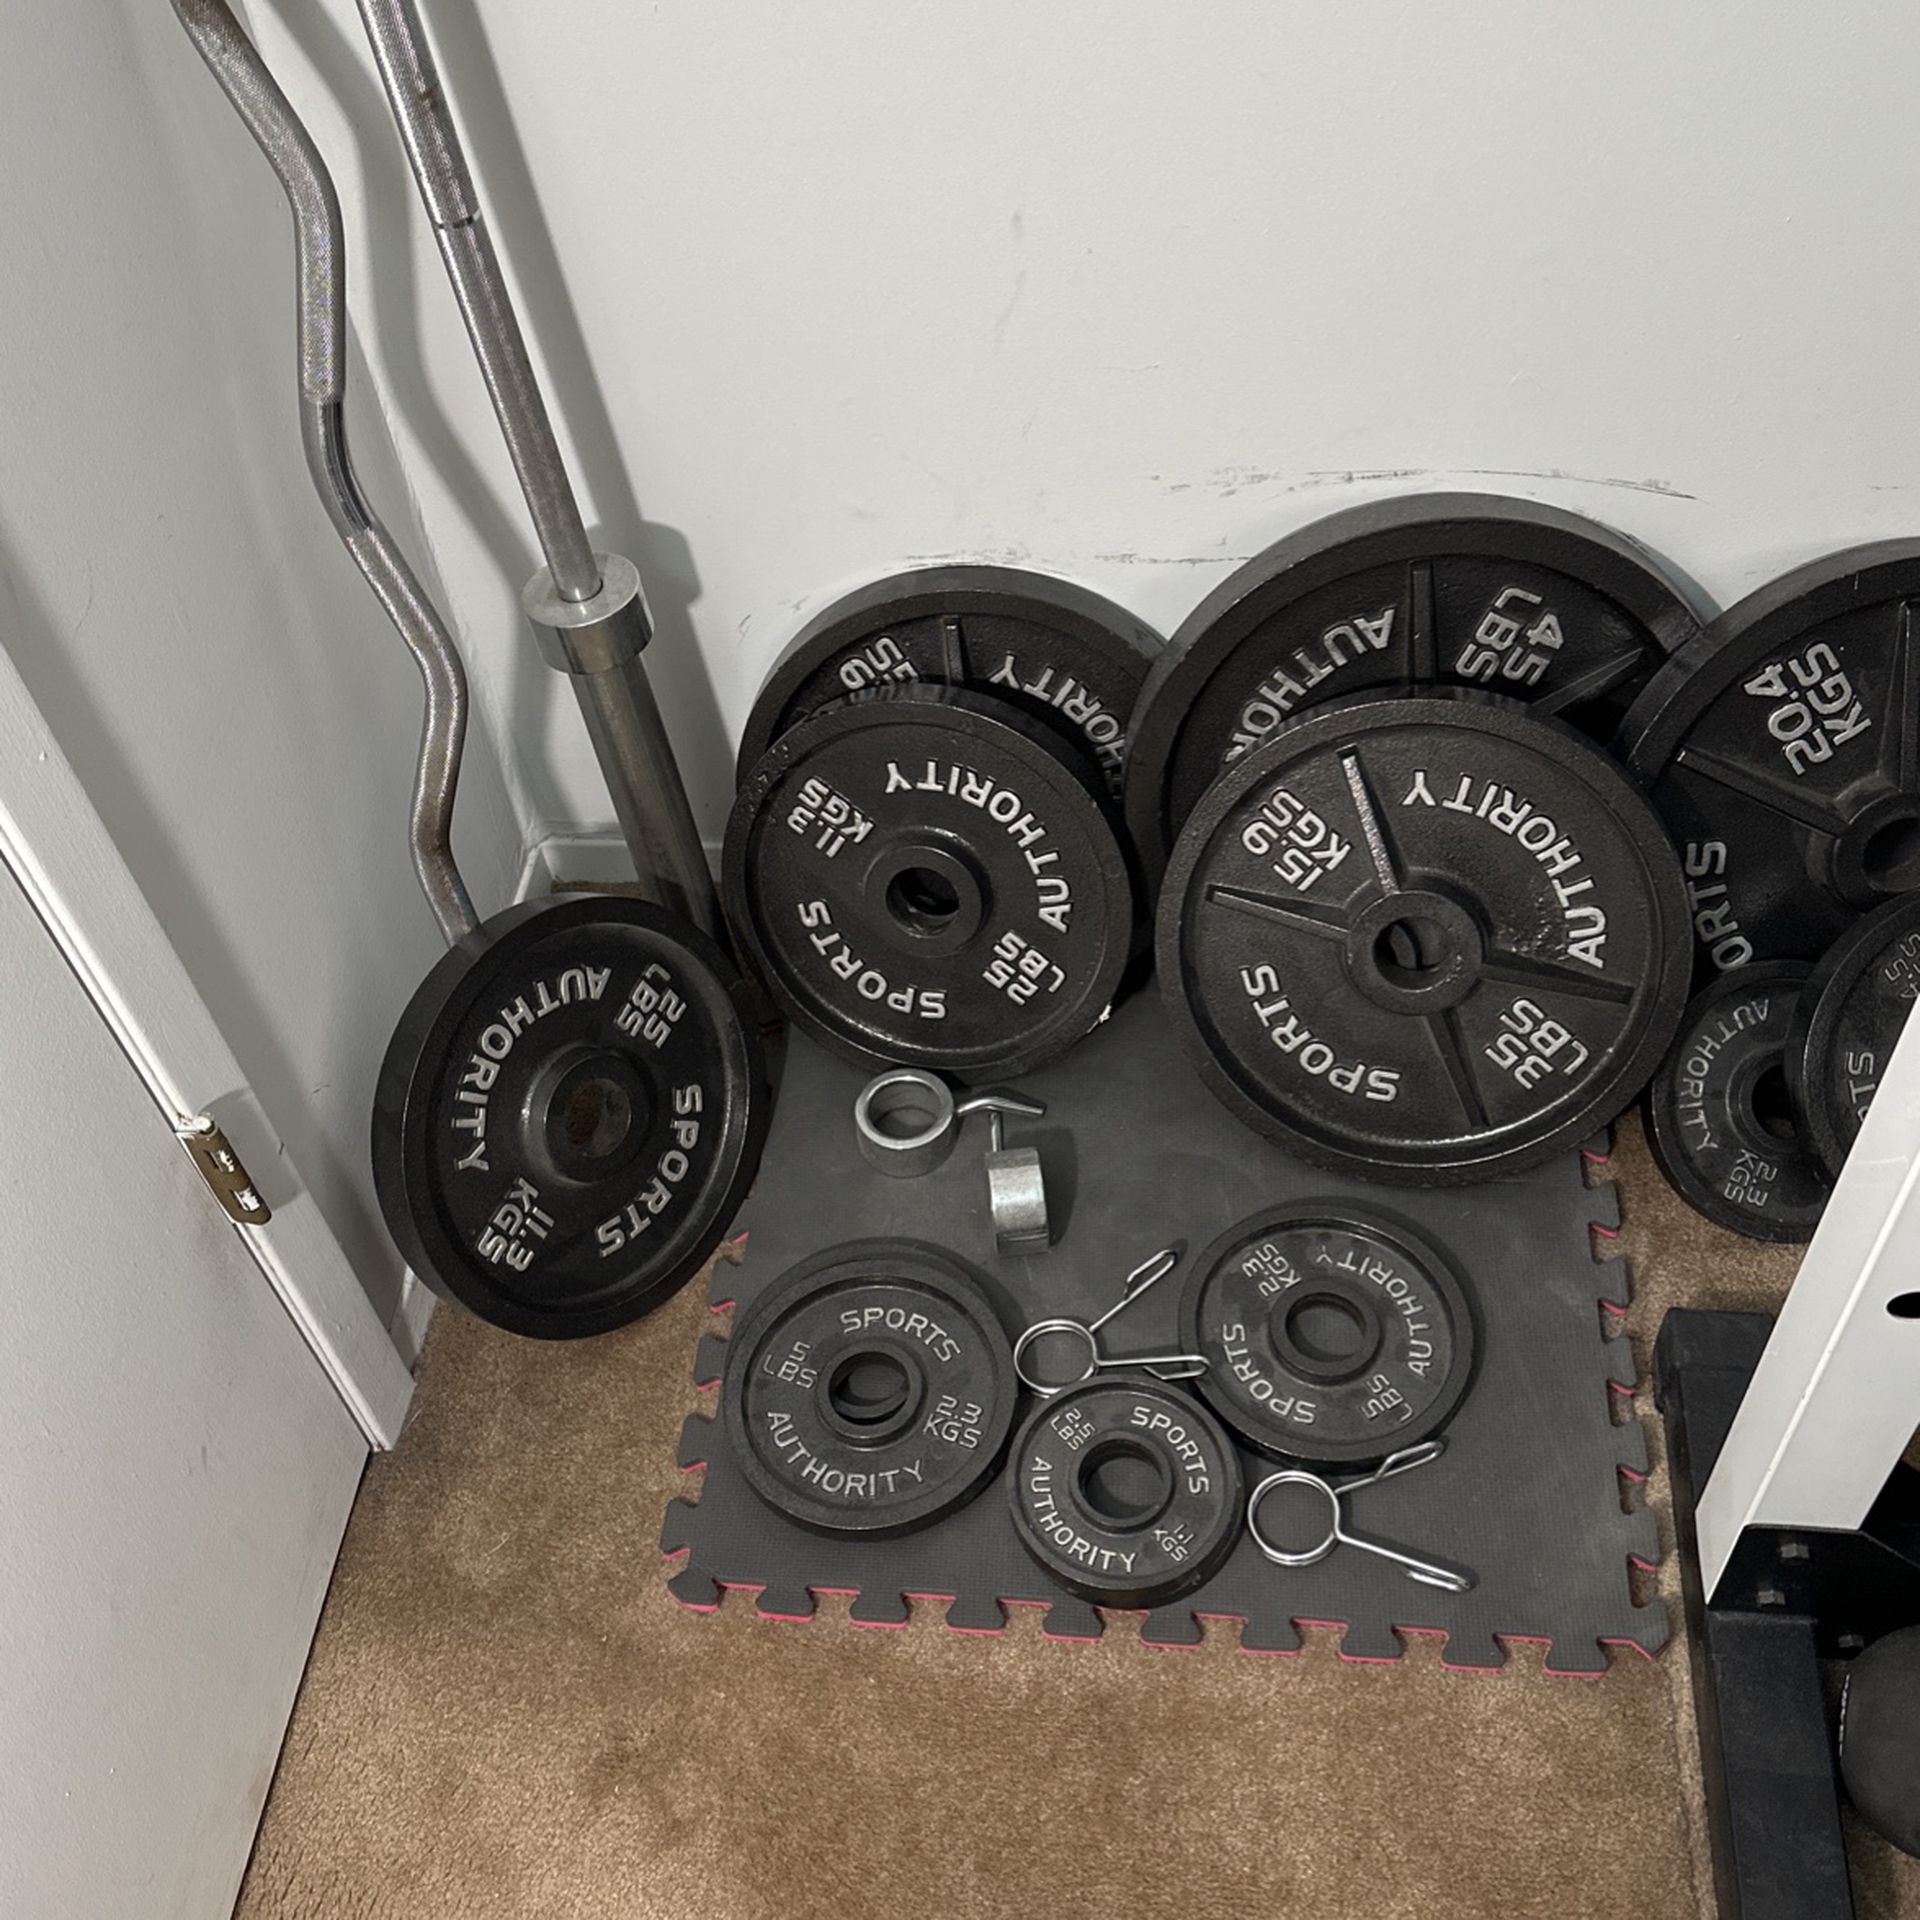 Weight Set Plus Olympic  Bench Bar And Curl 